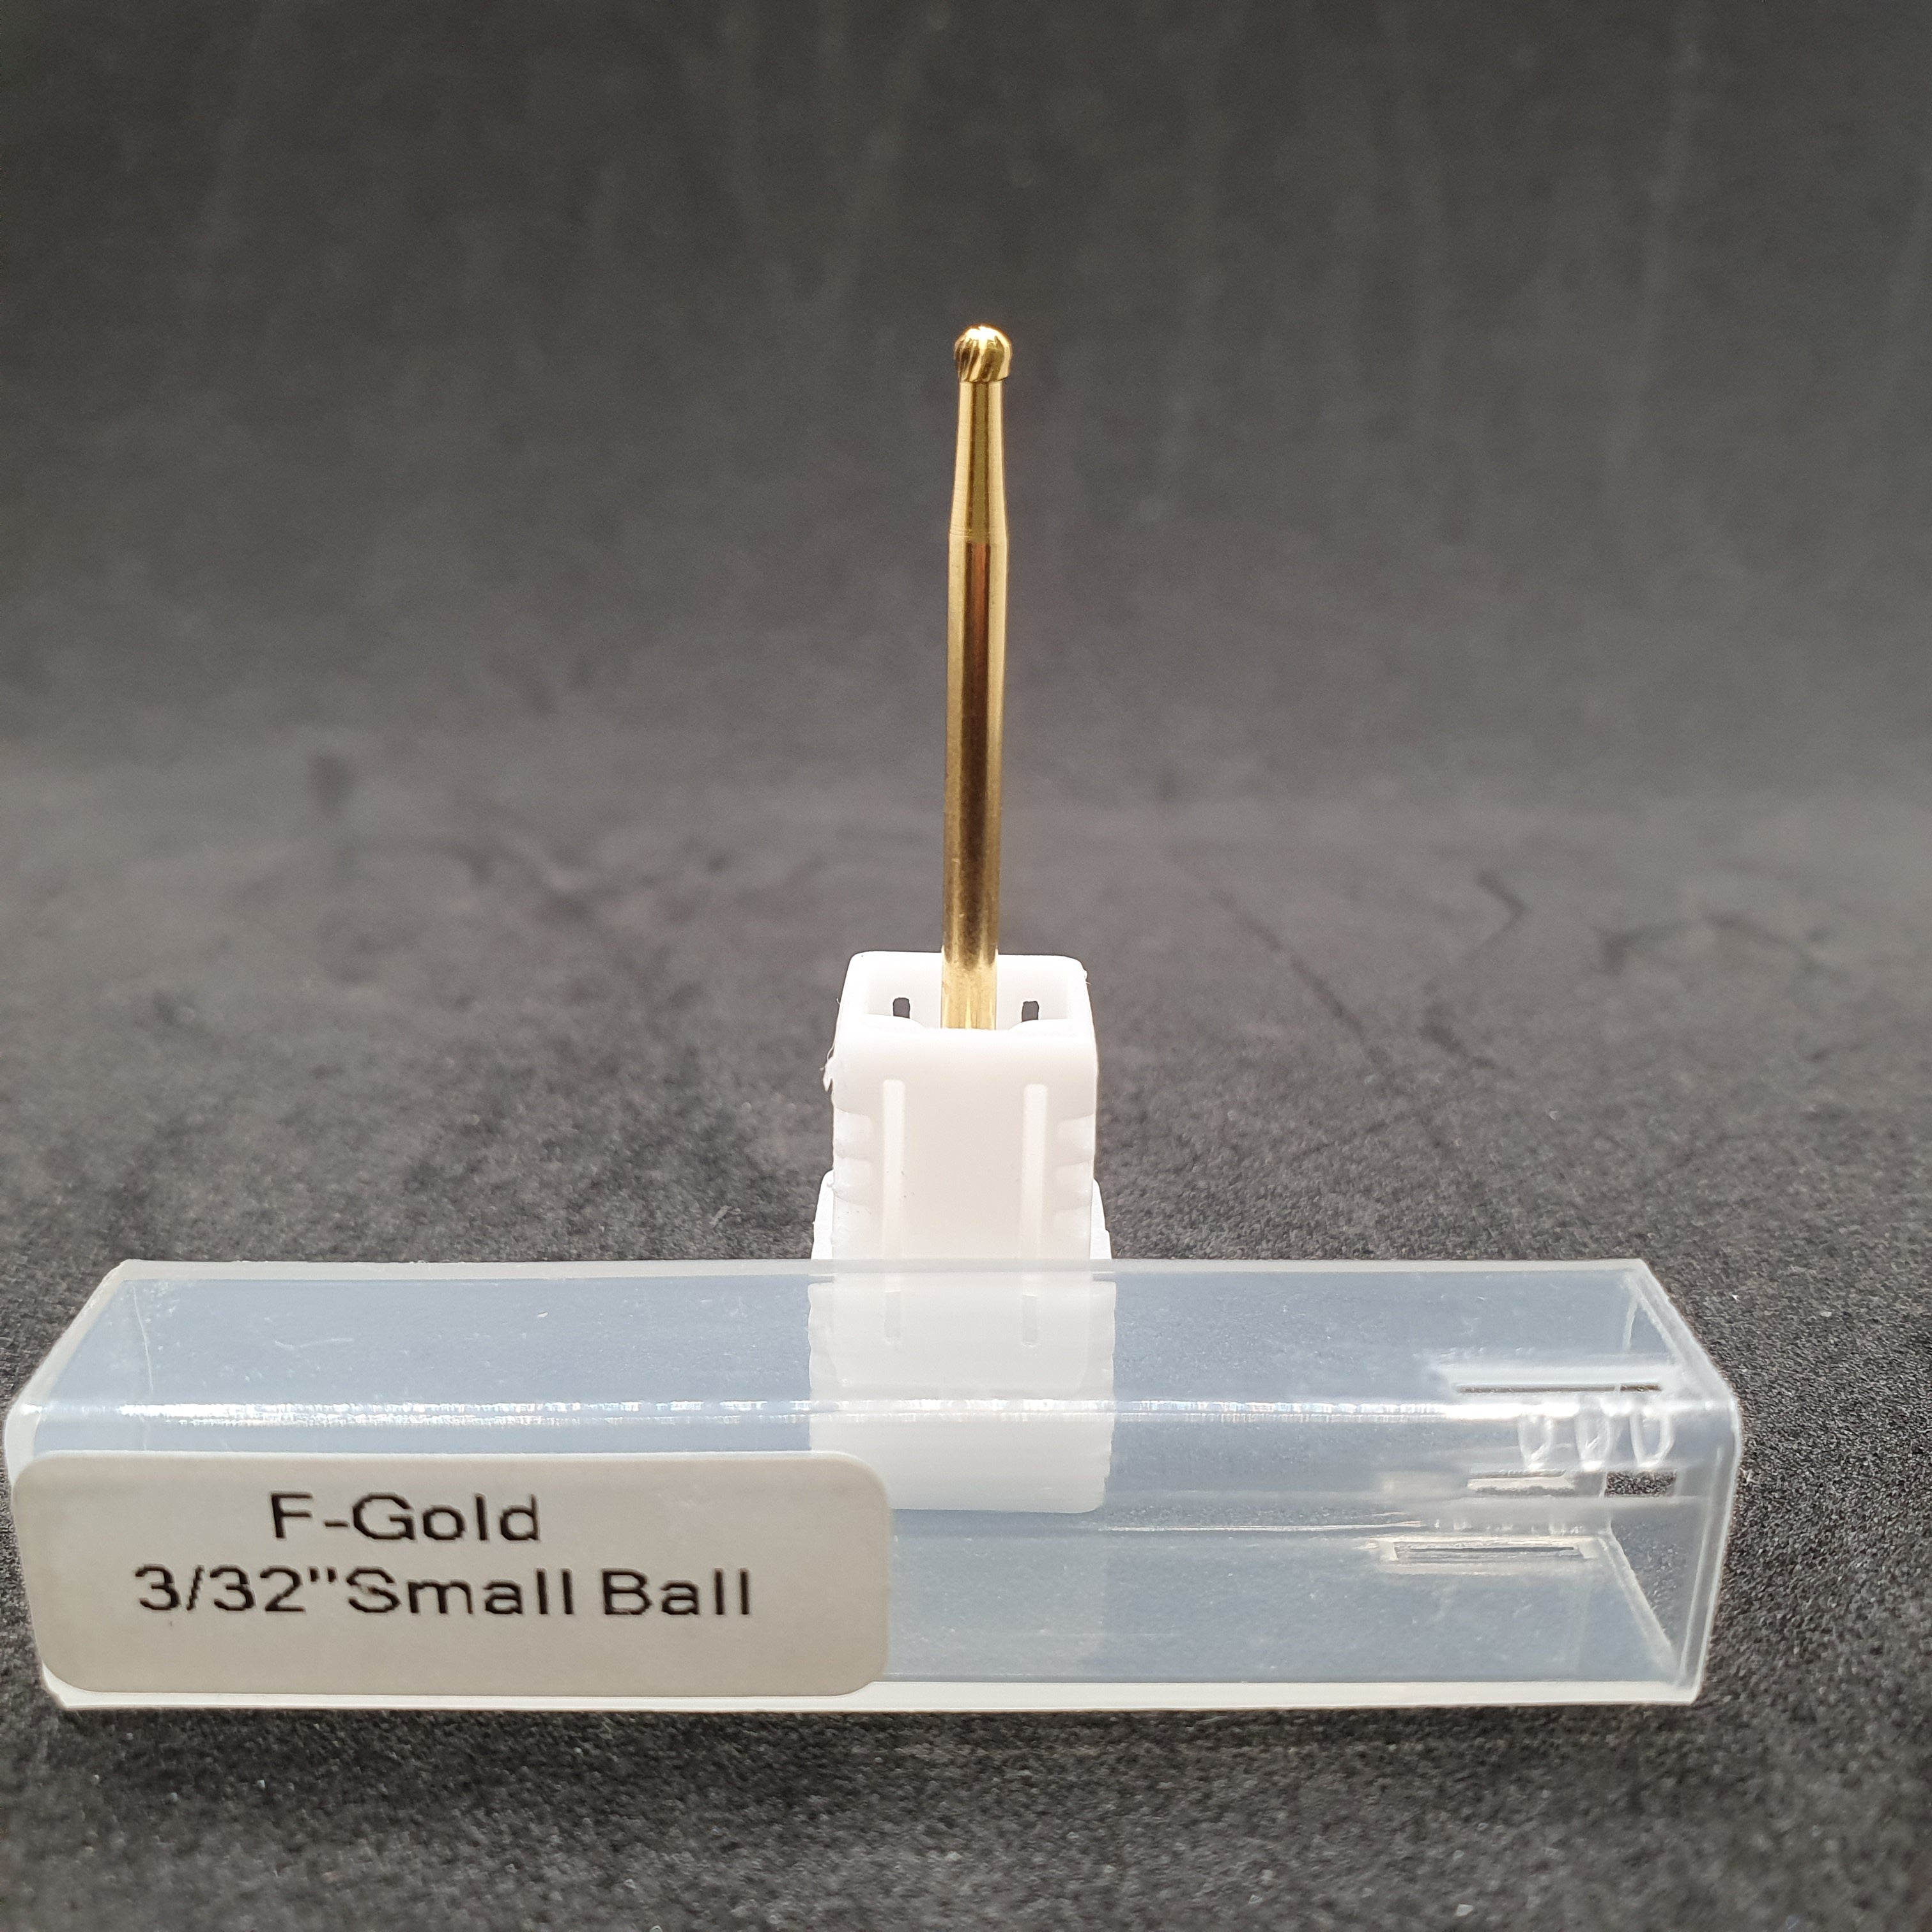 F-GOLD 3/32" SMALL BALL